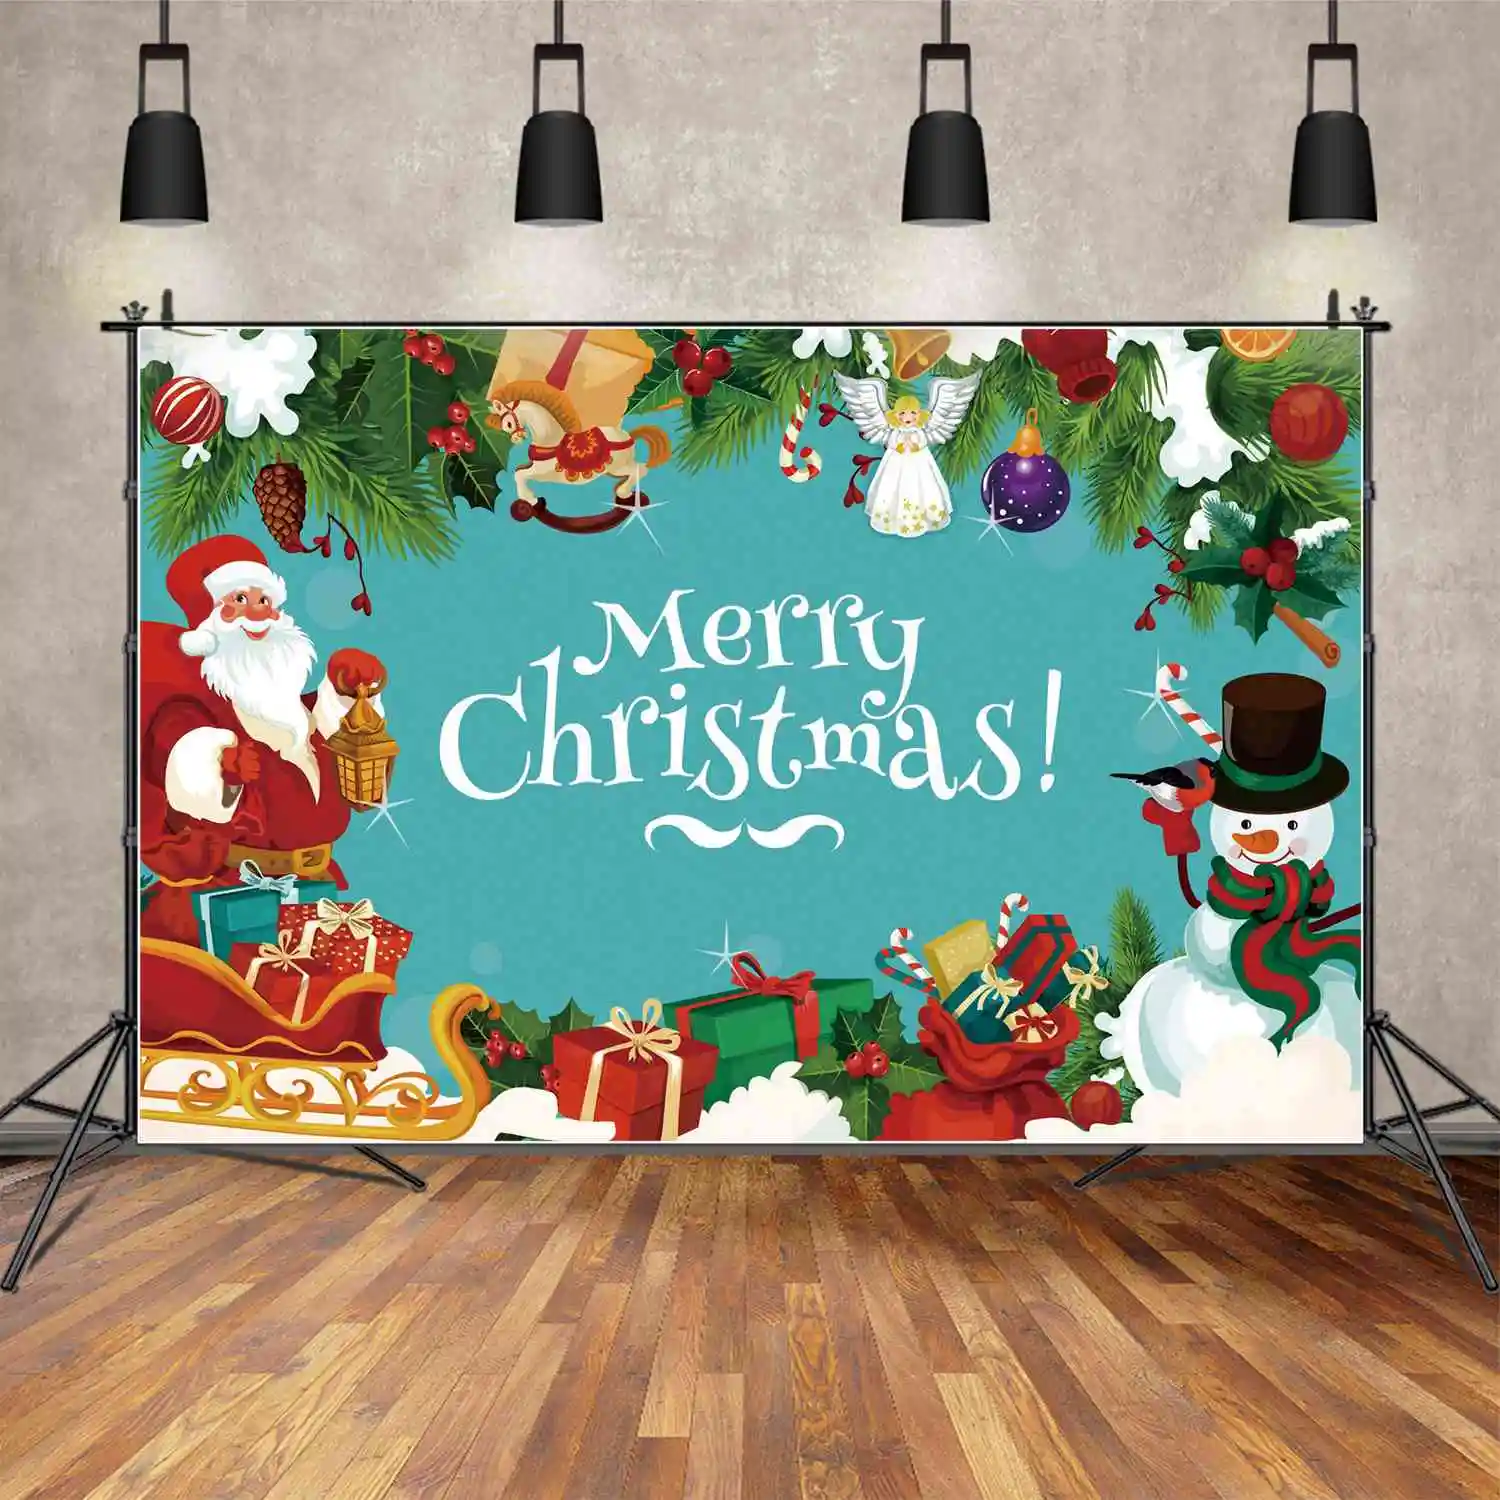 

MOON.QG Backdrop Merry Christmas Father Children Party Banner Background Angel Snowman Gift Hobbyhorse Crutch Photo Booth Props